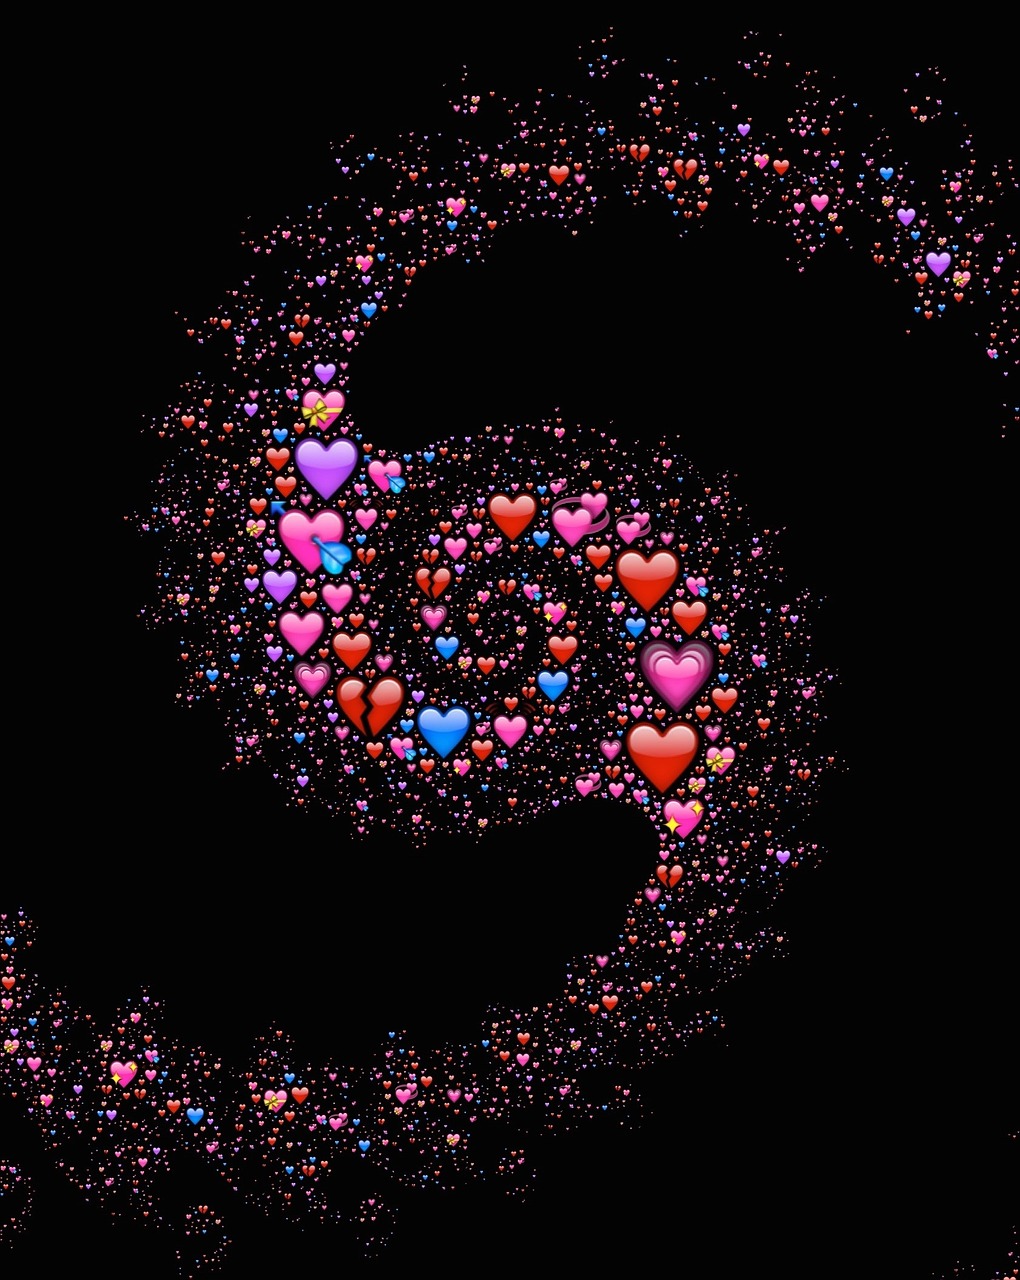 a spiral of hearts on a black background, flickr, generative art, glitter background, cute colorful adorable, made with photoshop, magic eye